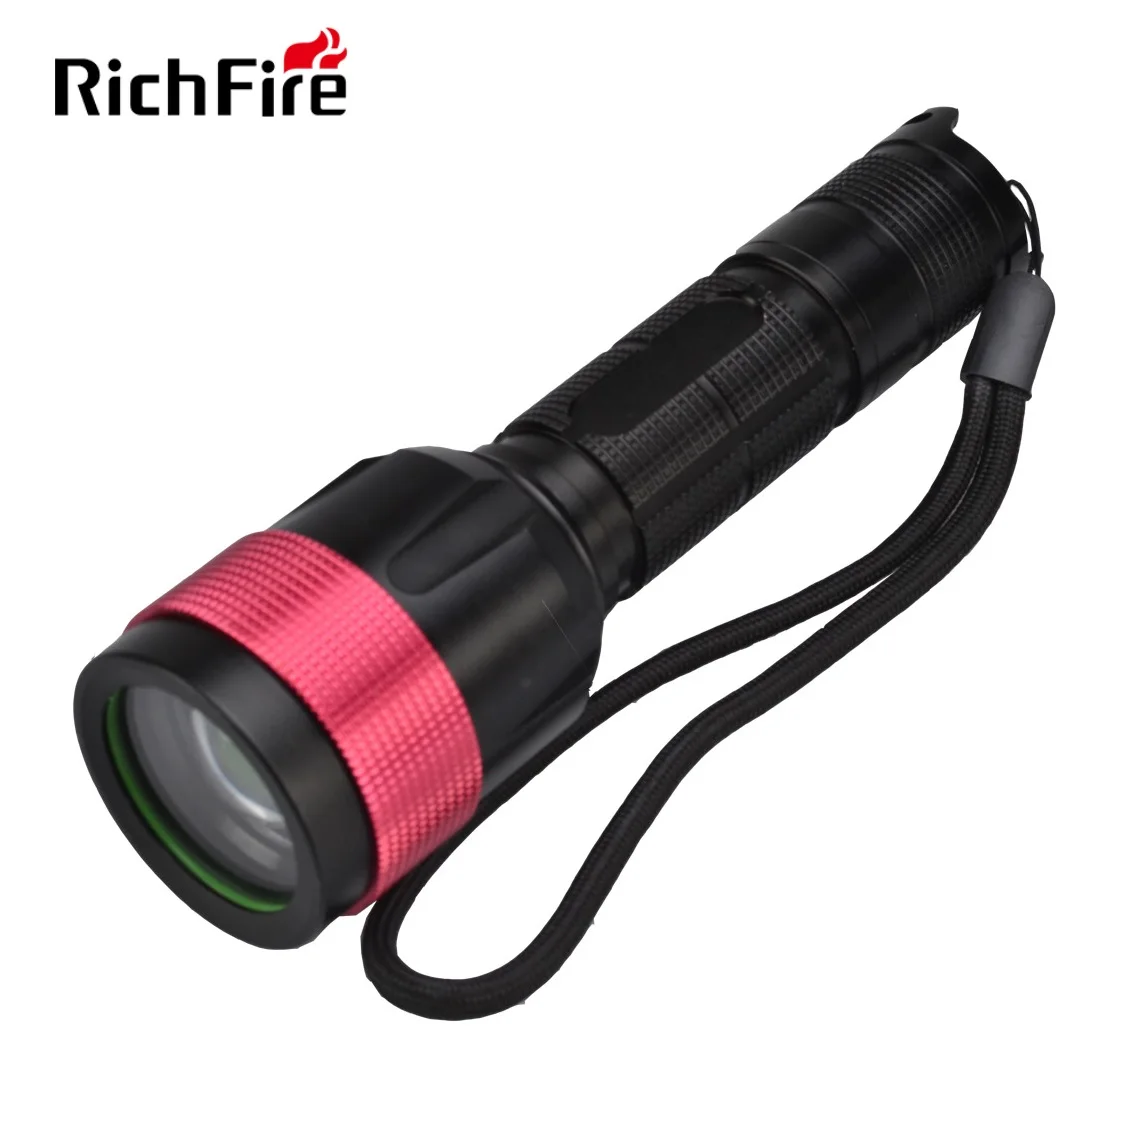 

RichFire SF-315 Zooming LED Flashlight Cree XM-L T6 800lm 5 Mode Powerful Torch by 18650 Battery Self Defense Hiking Camping